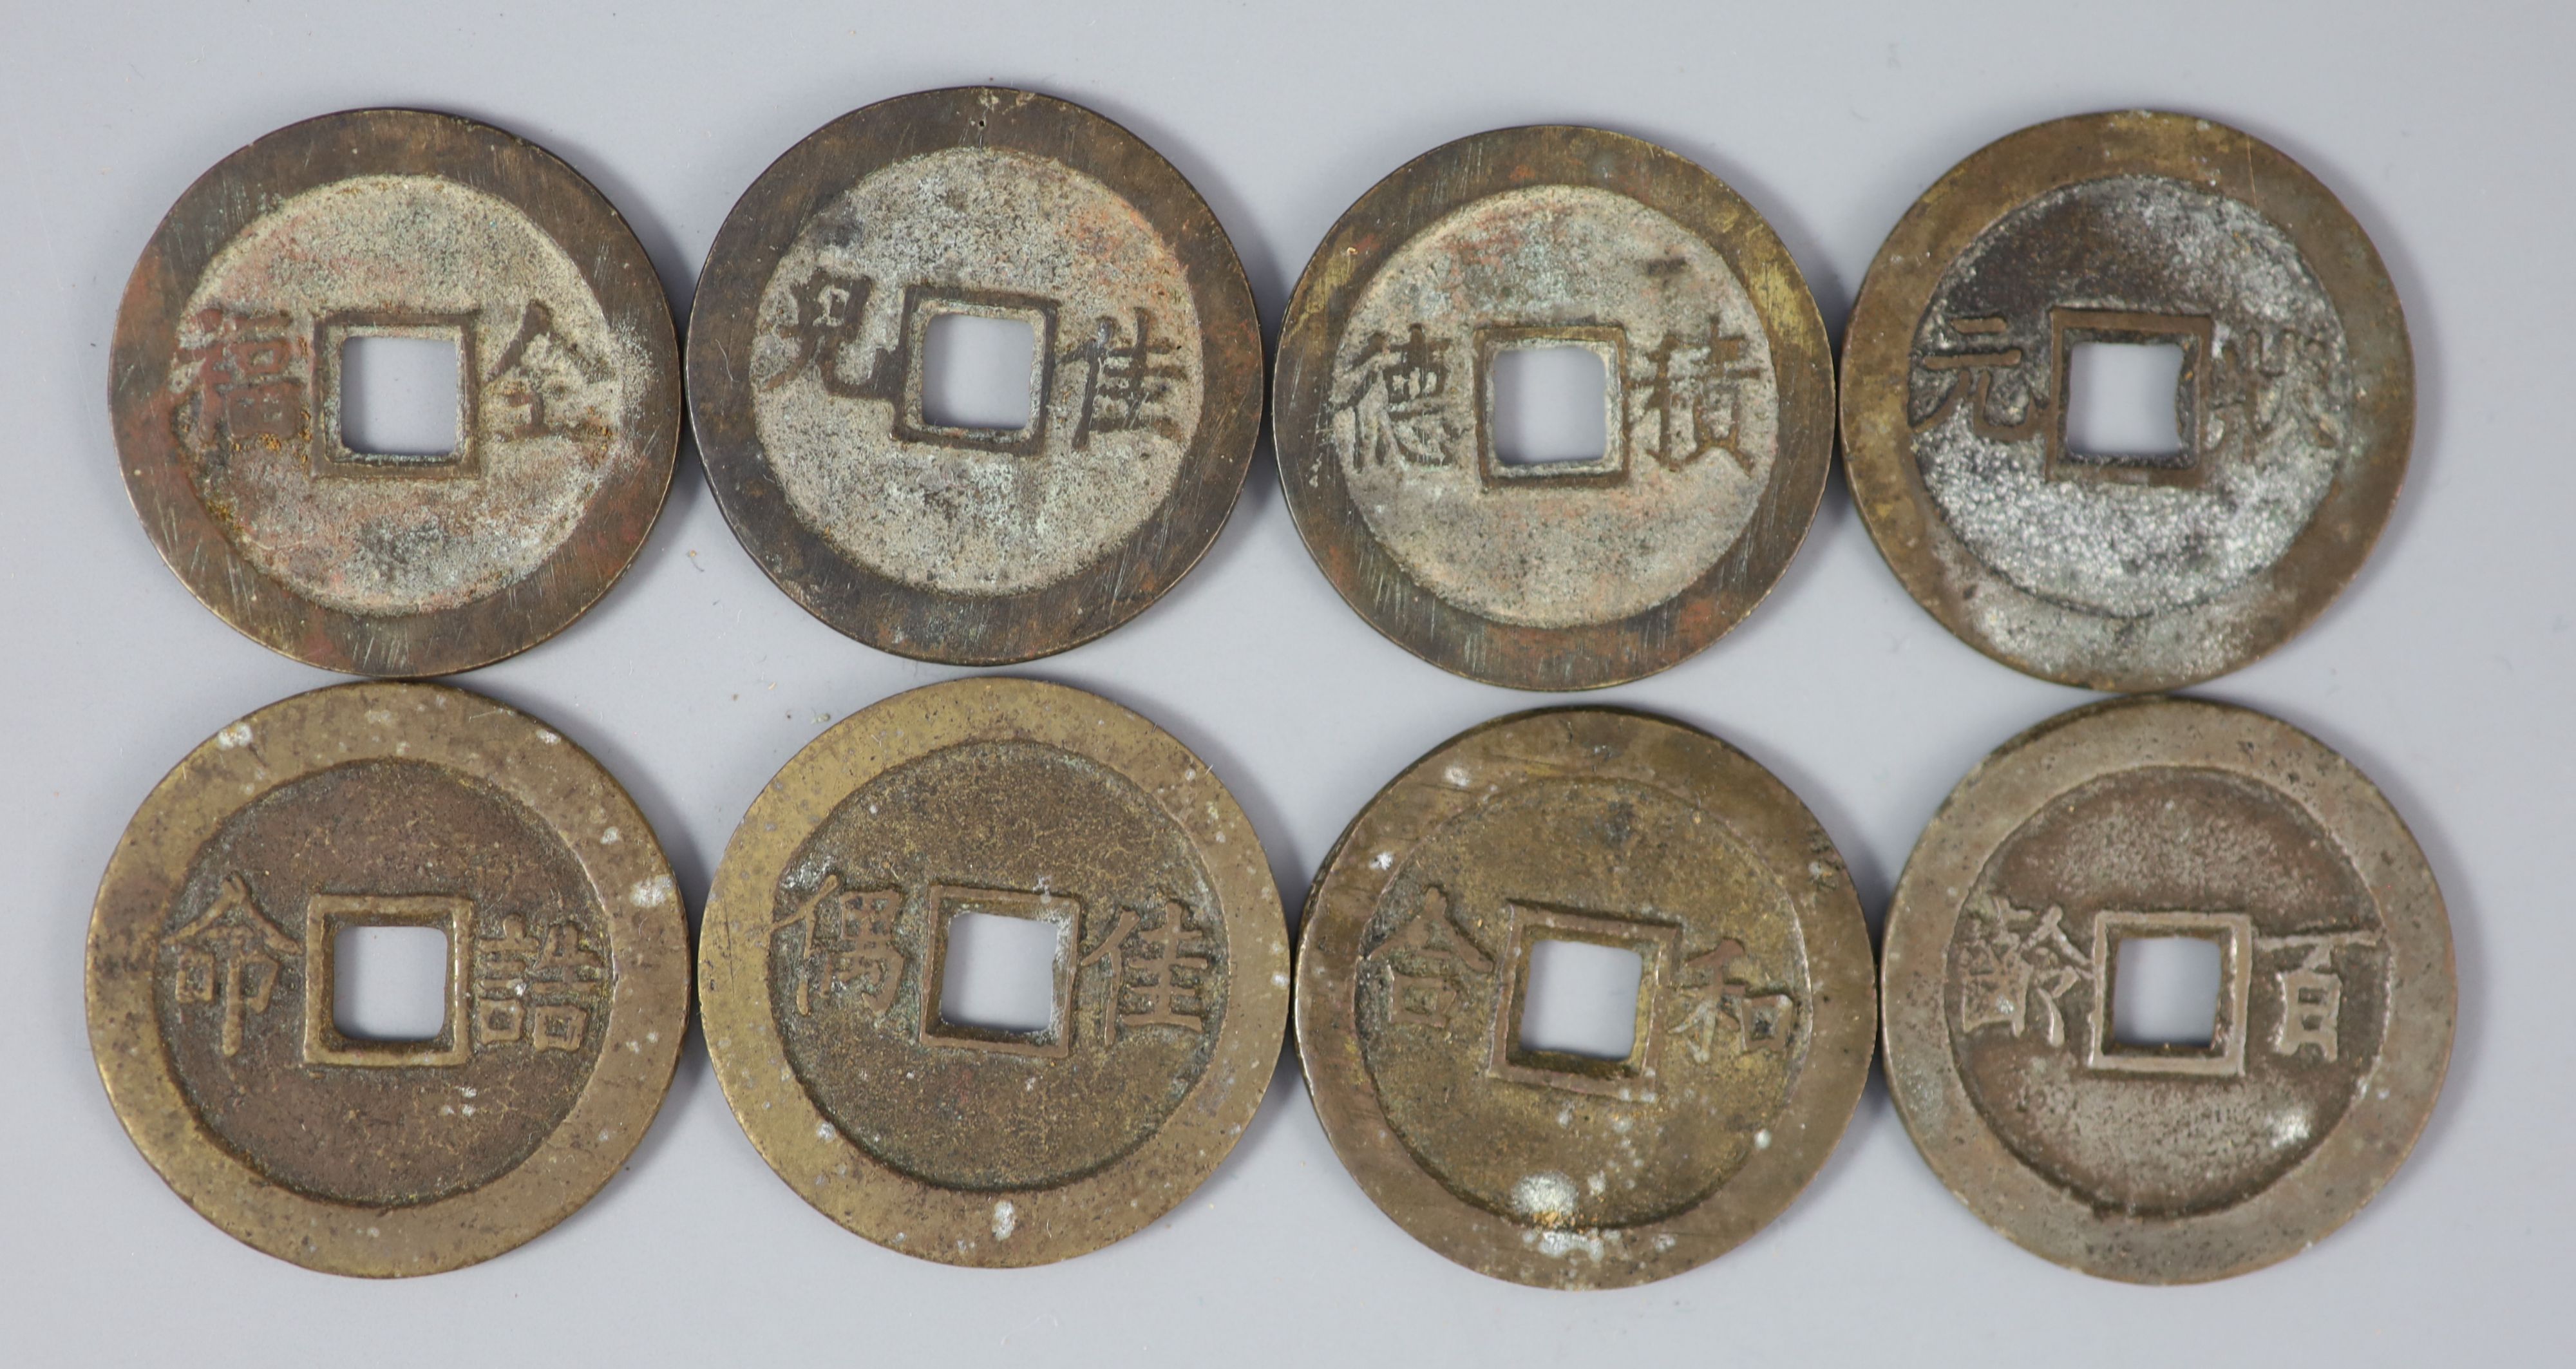 China, a rare set of 8 bronze charms or amulets, late Qing dynasty,